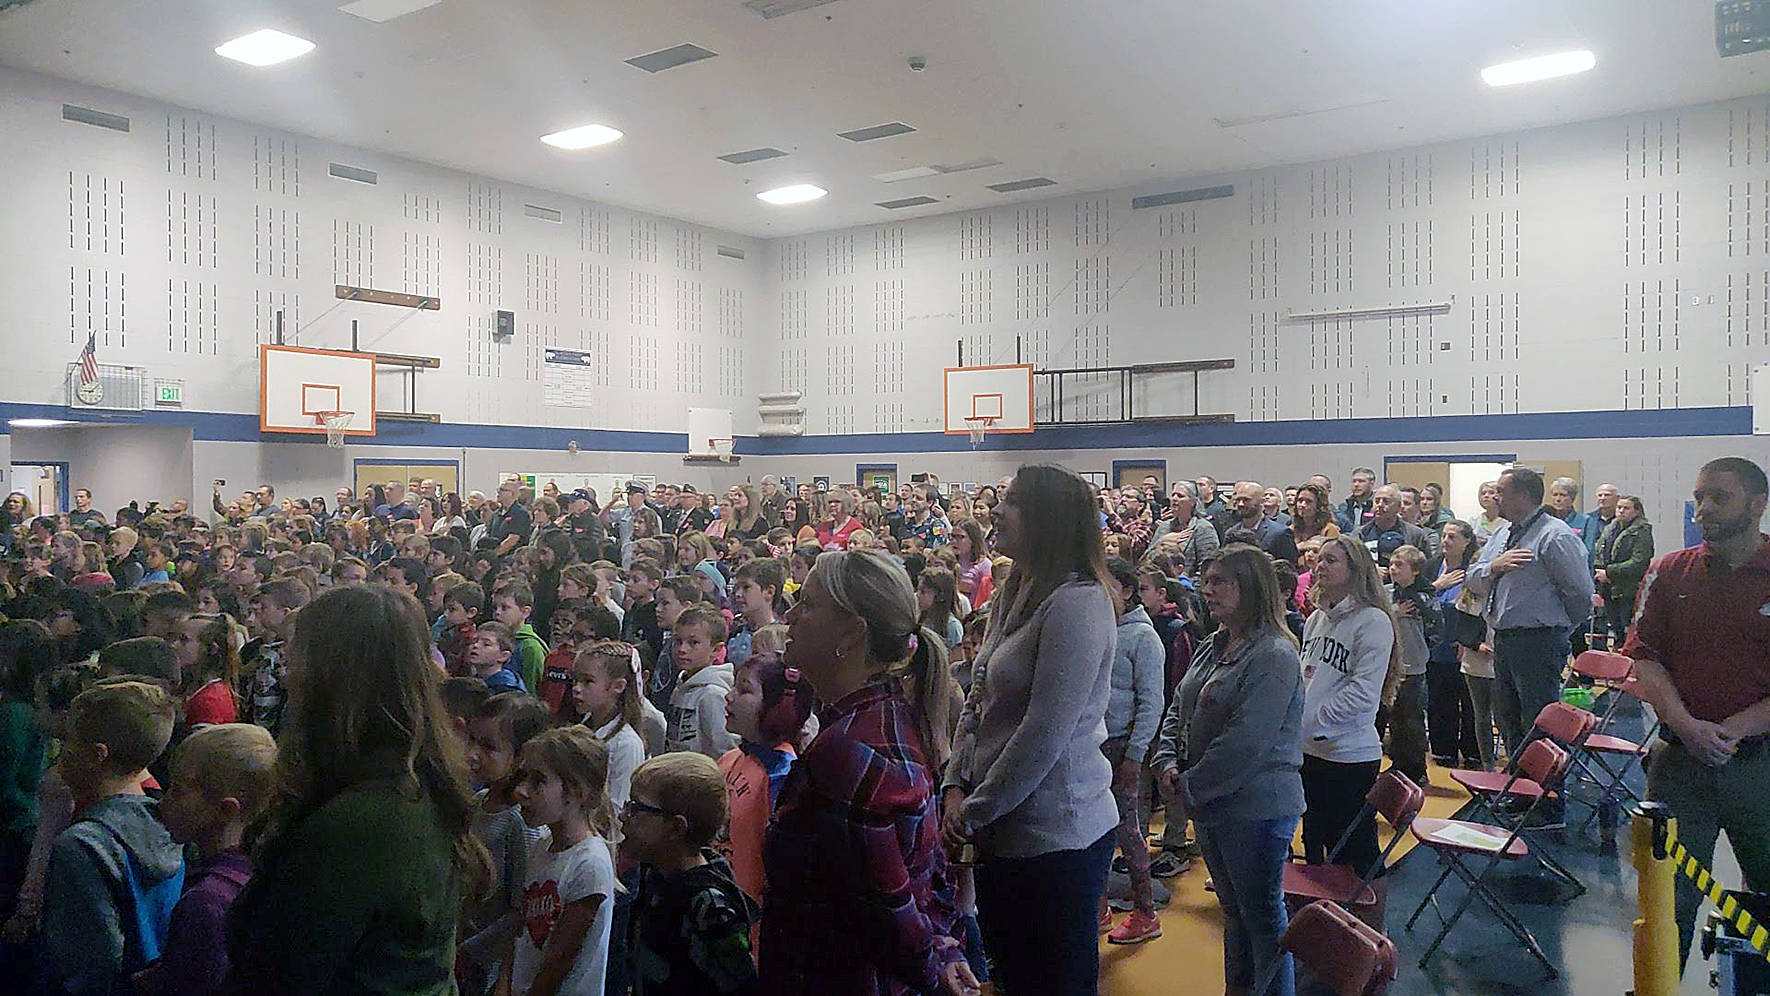 Hundreds of students, veterans and their families crowded into the Glacier Park Elementary School gymnasium for a special Veterans Day Assembly held by the fifth grade class on Friday, Nov. 8. Photo by Danielle Chastaine.                                 Hundreds of students, veterans and their families crowded into the Glacier Park Elementary School gymnasium for a special Veterans Day Assembly held by the fifth grade class on Friday, Nov. 8. Photo by Danielle Chastaine.